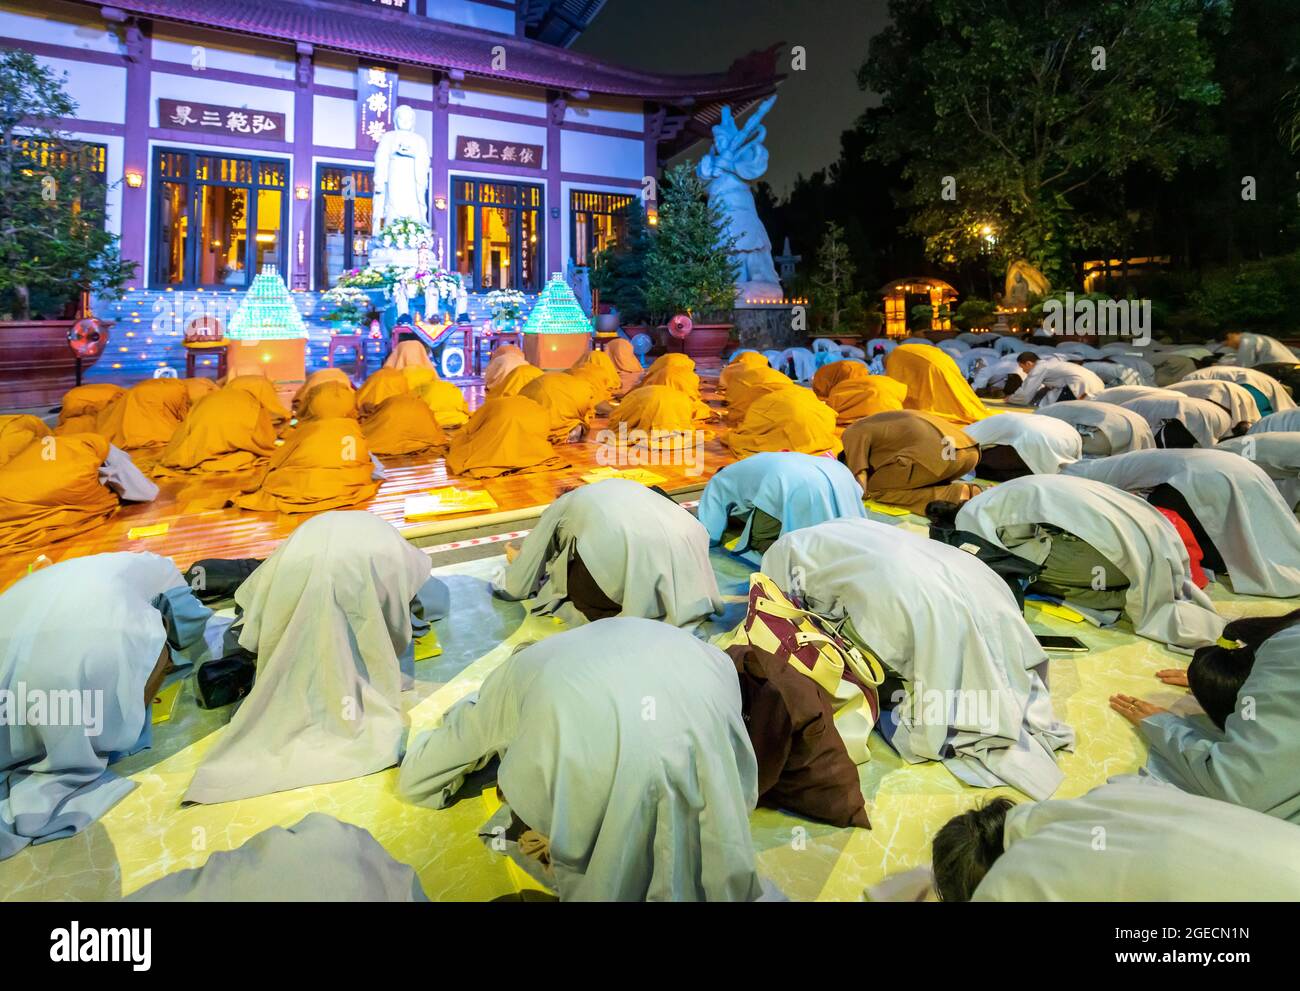 Monks are reverently bowing to Buddha during evening ceremony for Amitabha Buddha at an ancient temple in Ho Chi Minh City, Vietnam Stock Photo